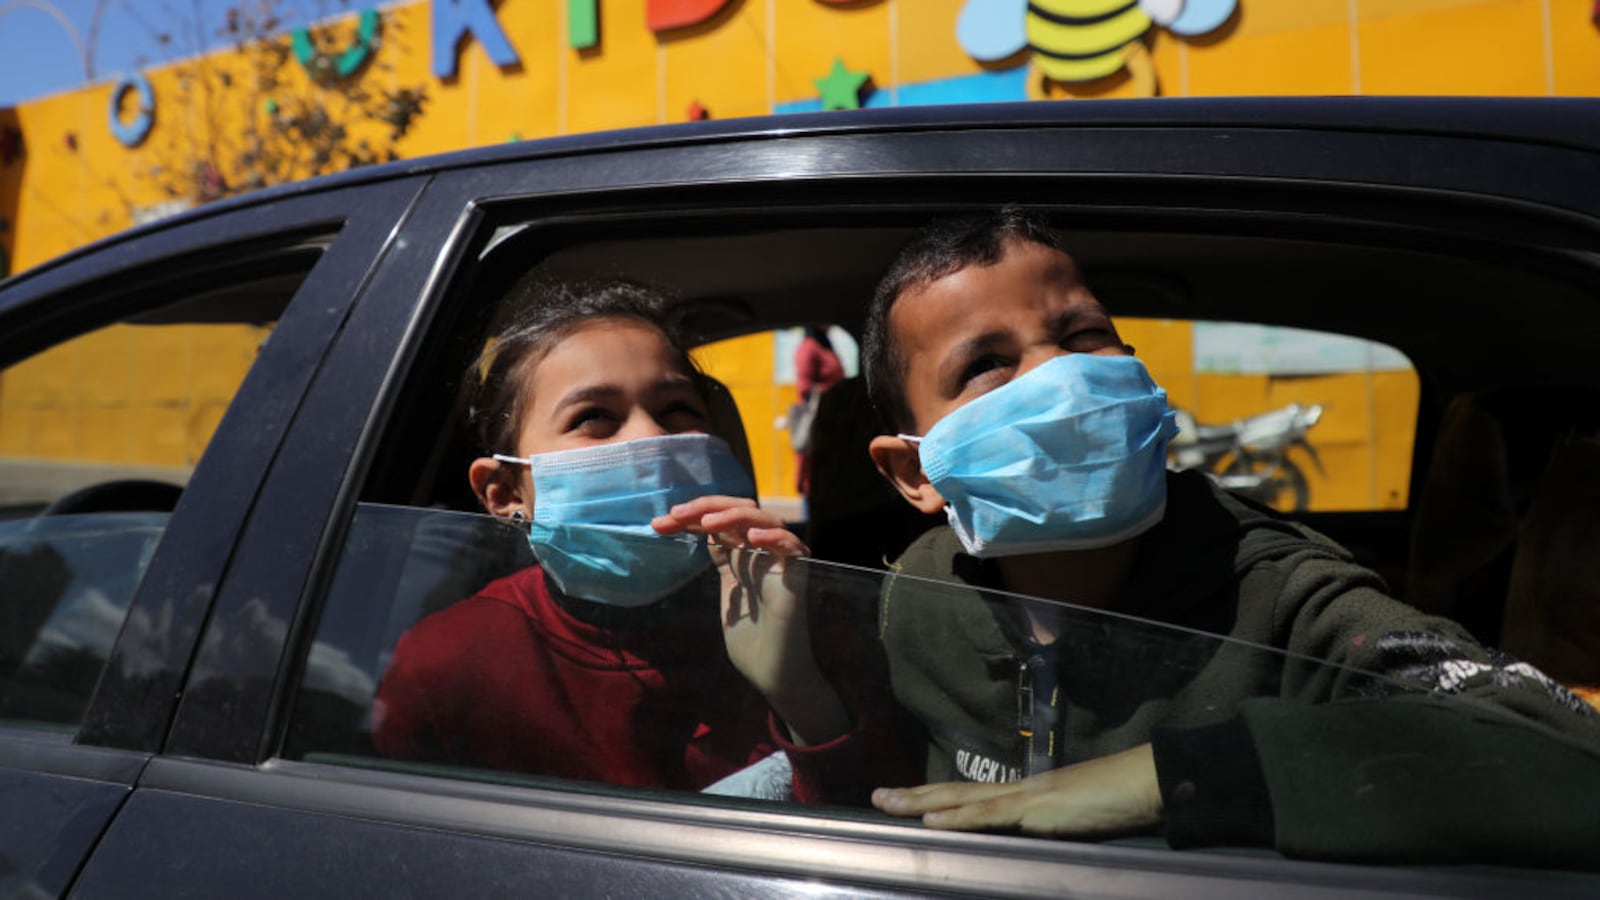 Palestinian children wearing masks look out of a car window in Gaza City on March 7, 2020, following a government decision to suspend schools due to fears of the spread of COVID-19.